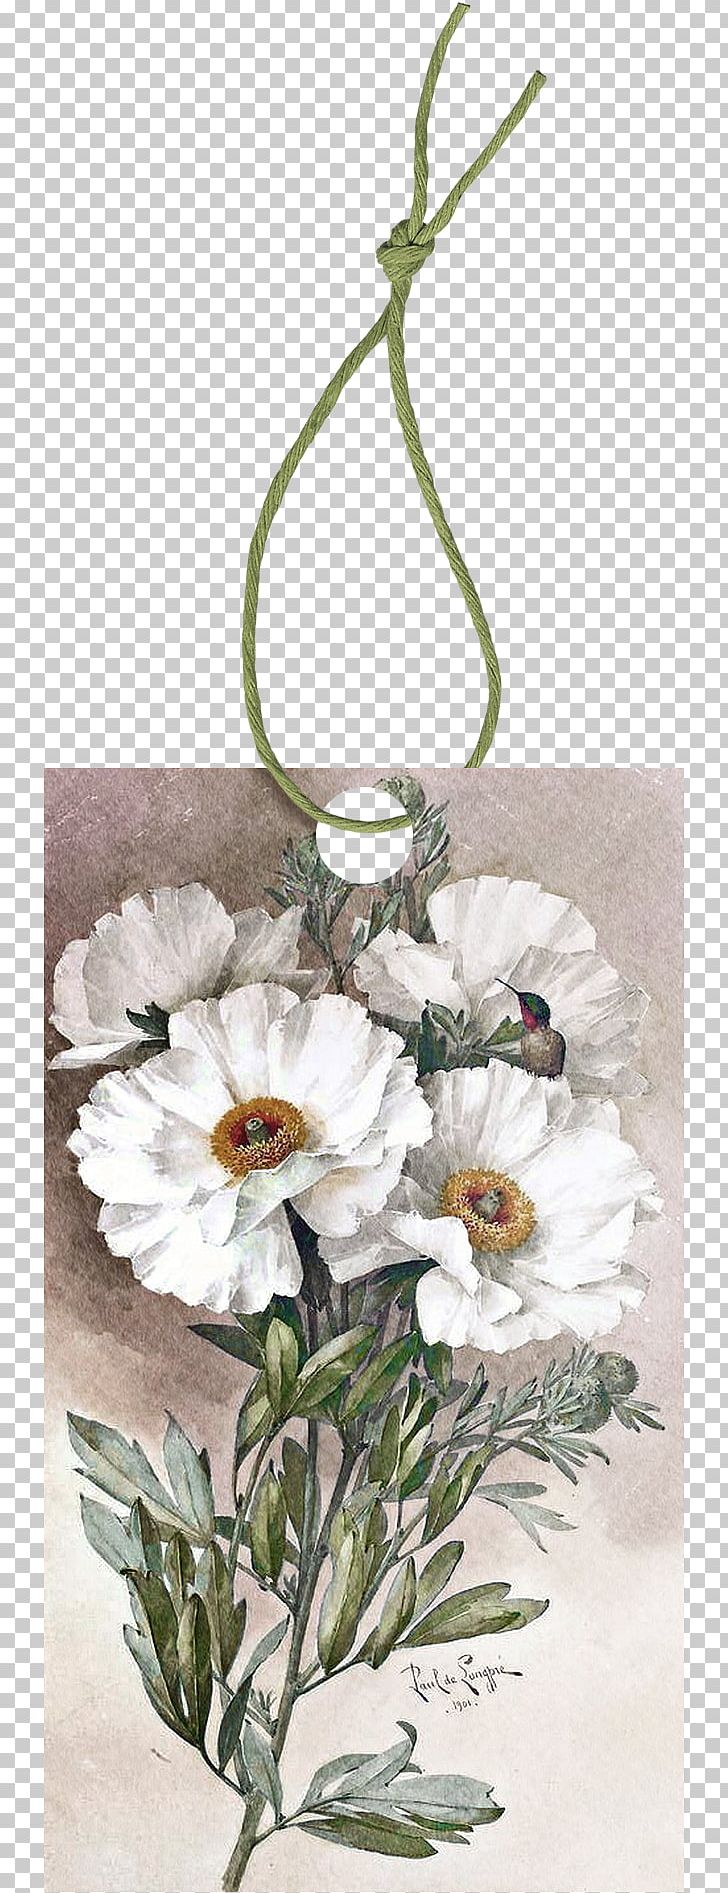 Poppy Romneya Watercolor Painting Botanical Illustration PNG, Clipart, Artificial Flower, Cartoon Rope, Flower, Flower Arranging, Hemp Rope Free PNG Download